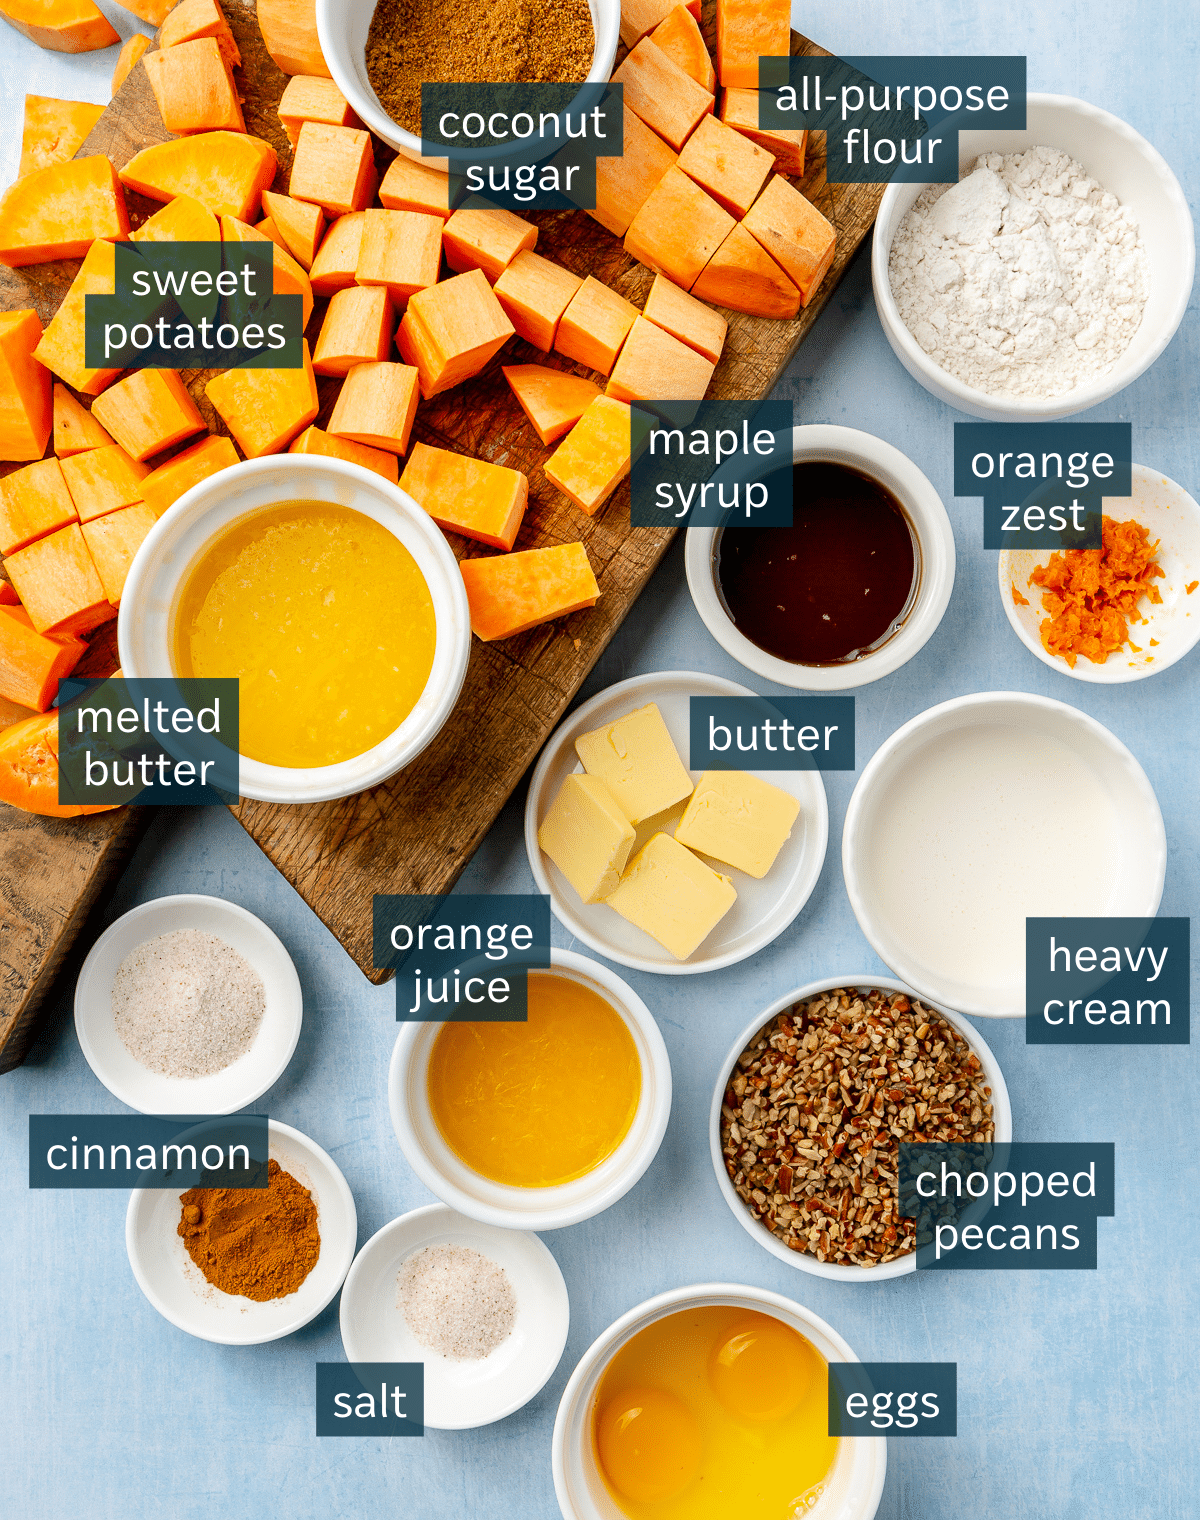 Ingredients for sweet potato casserole sit in a variety of bowls. Cubed sweet potato lays on a brown chopping block.